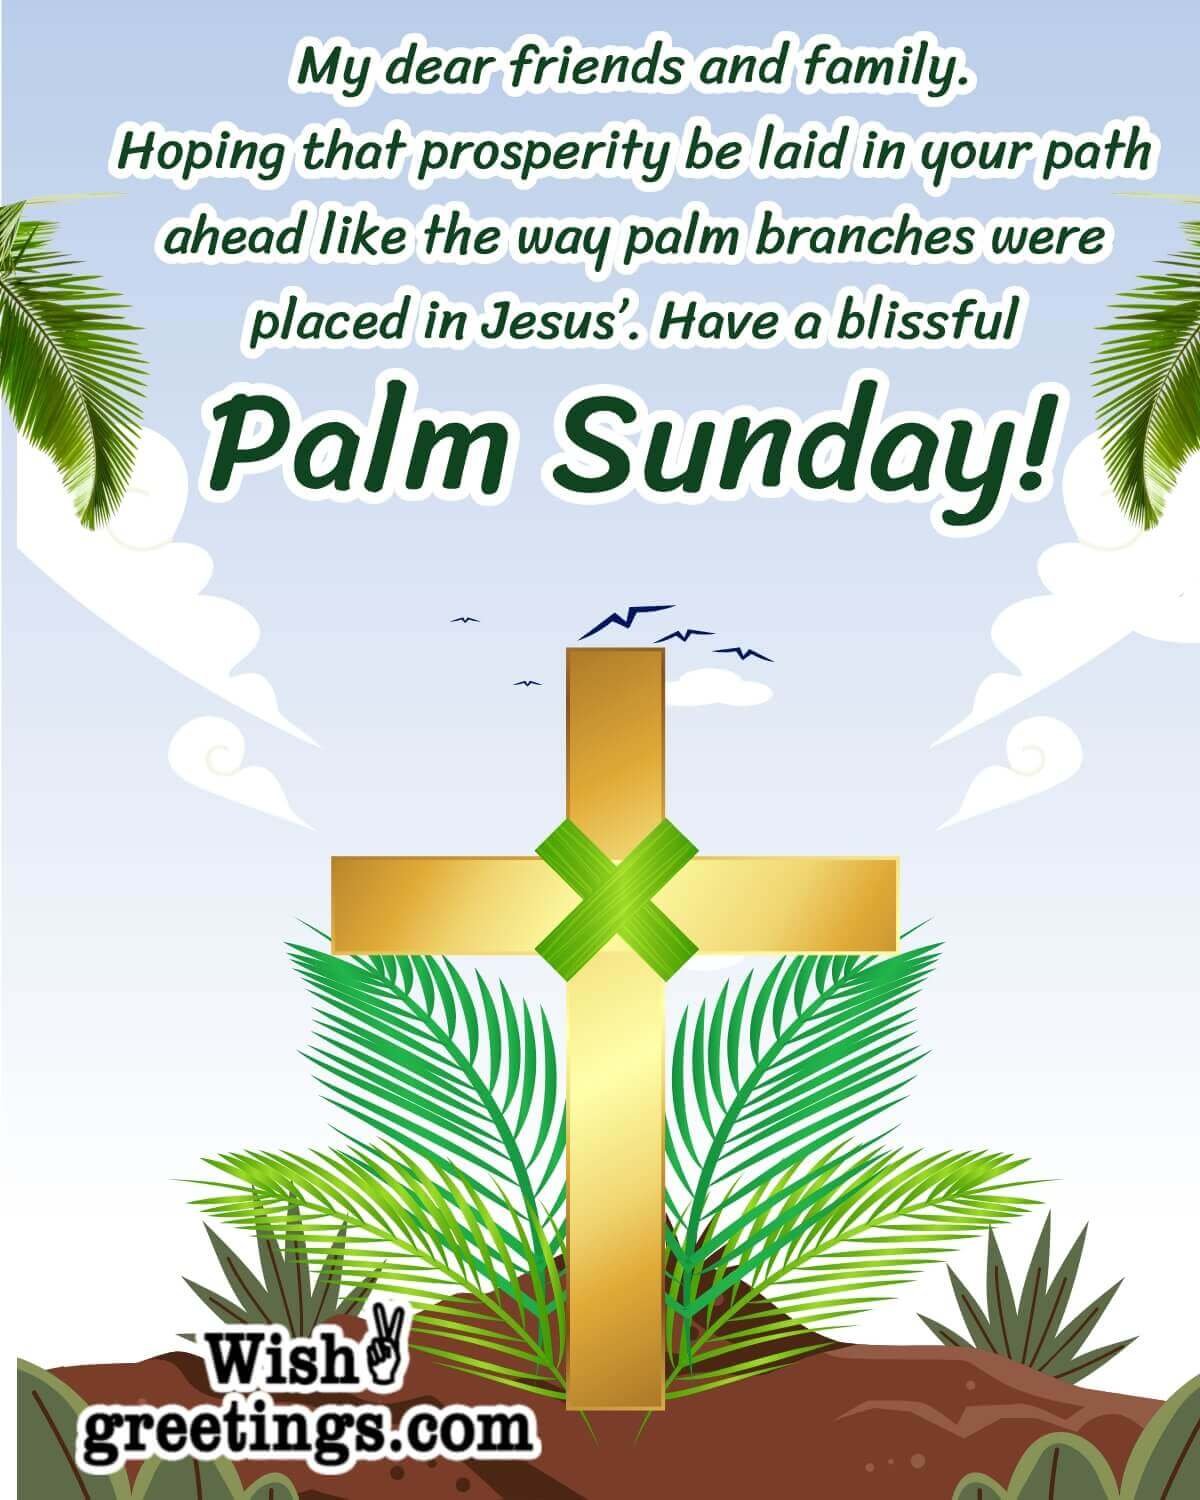 Palm Sunday Message Pic For Friends And Family